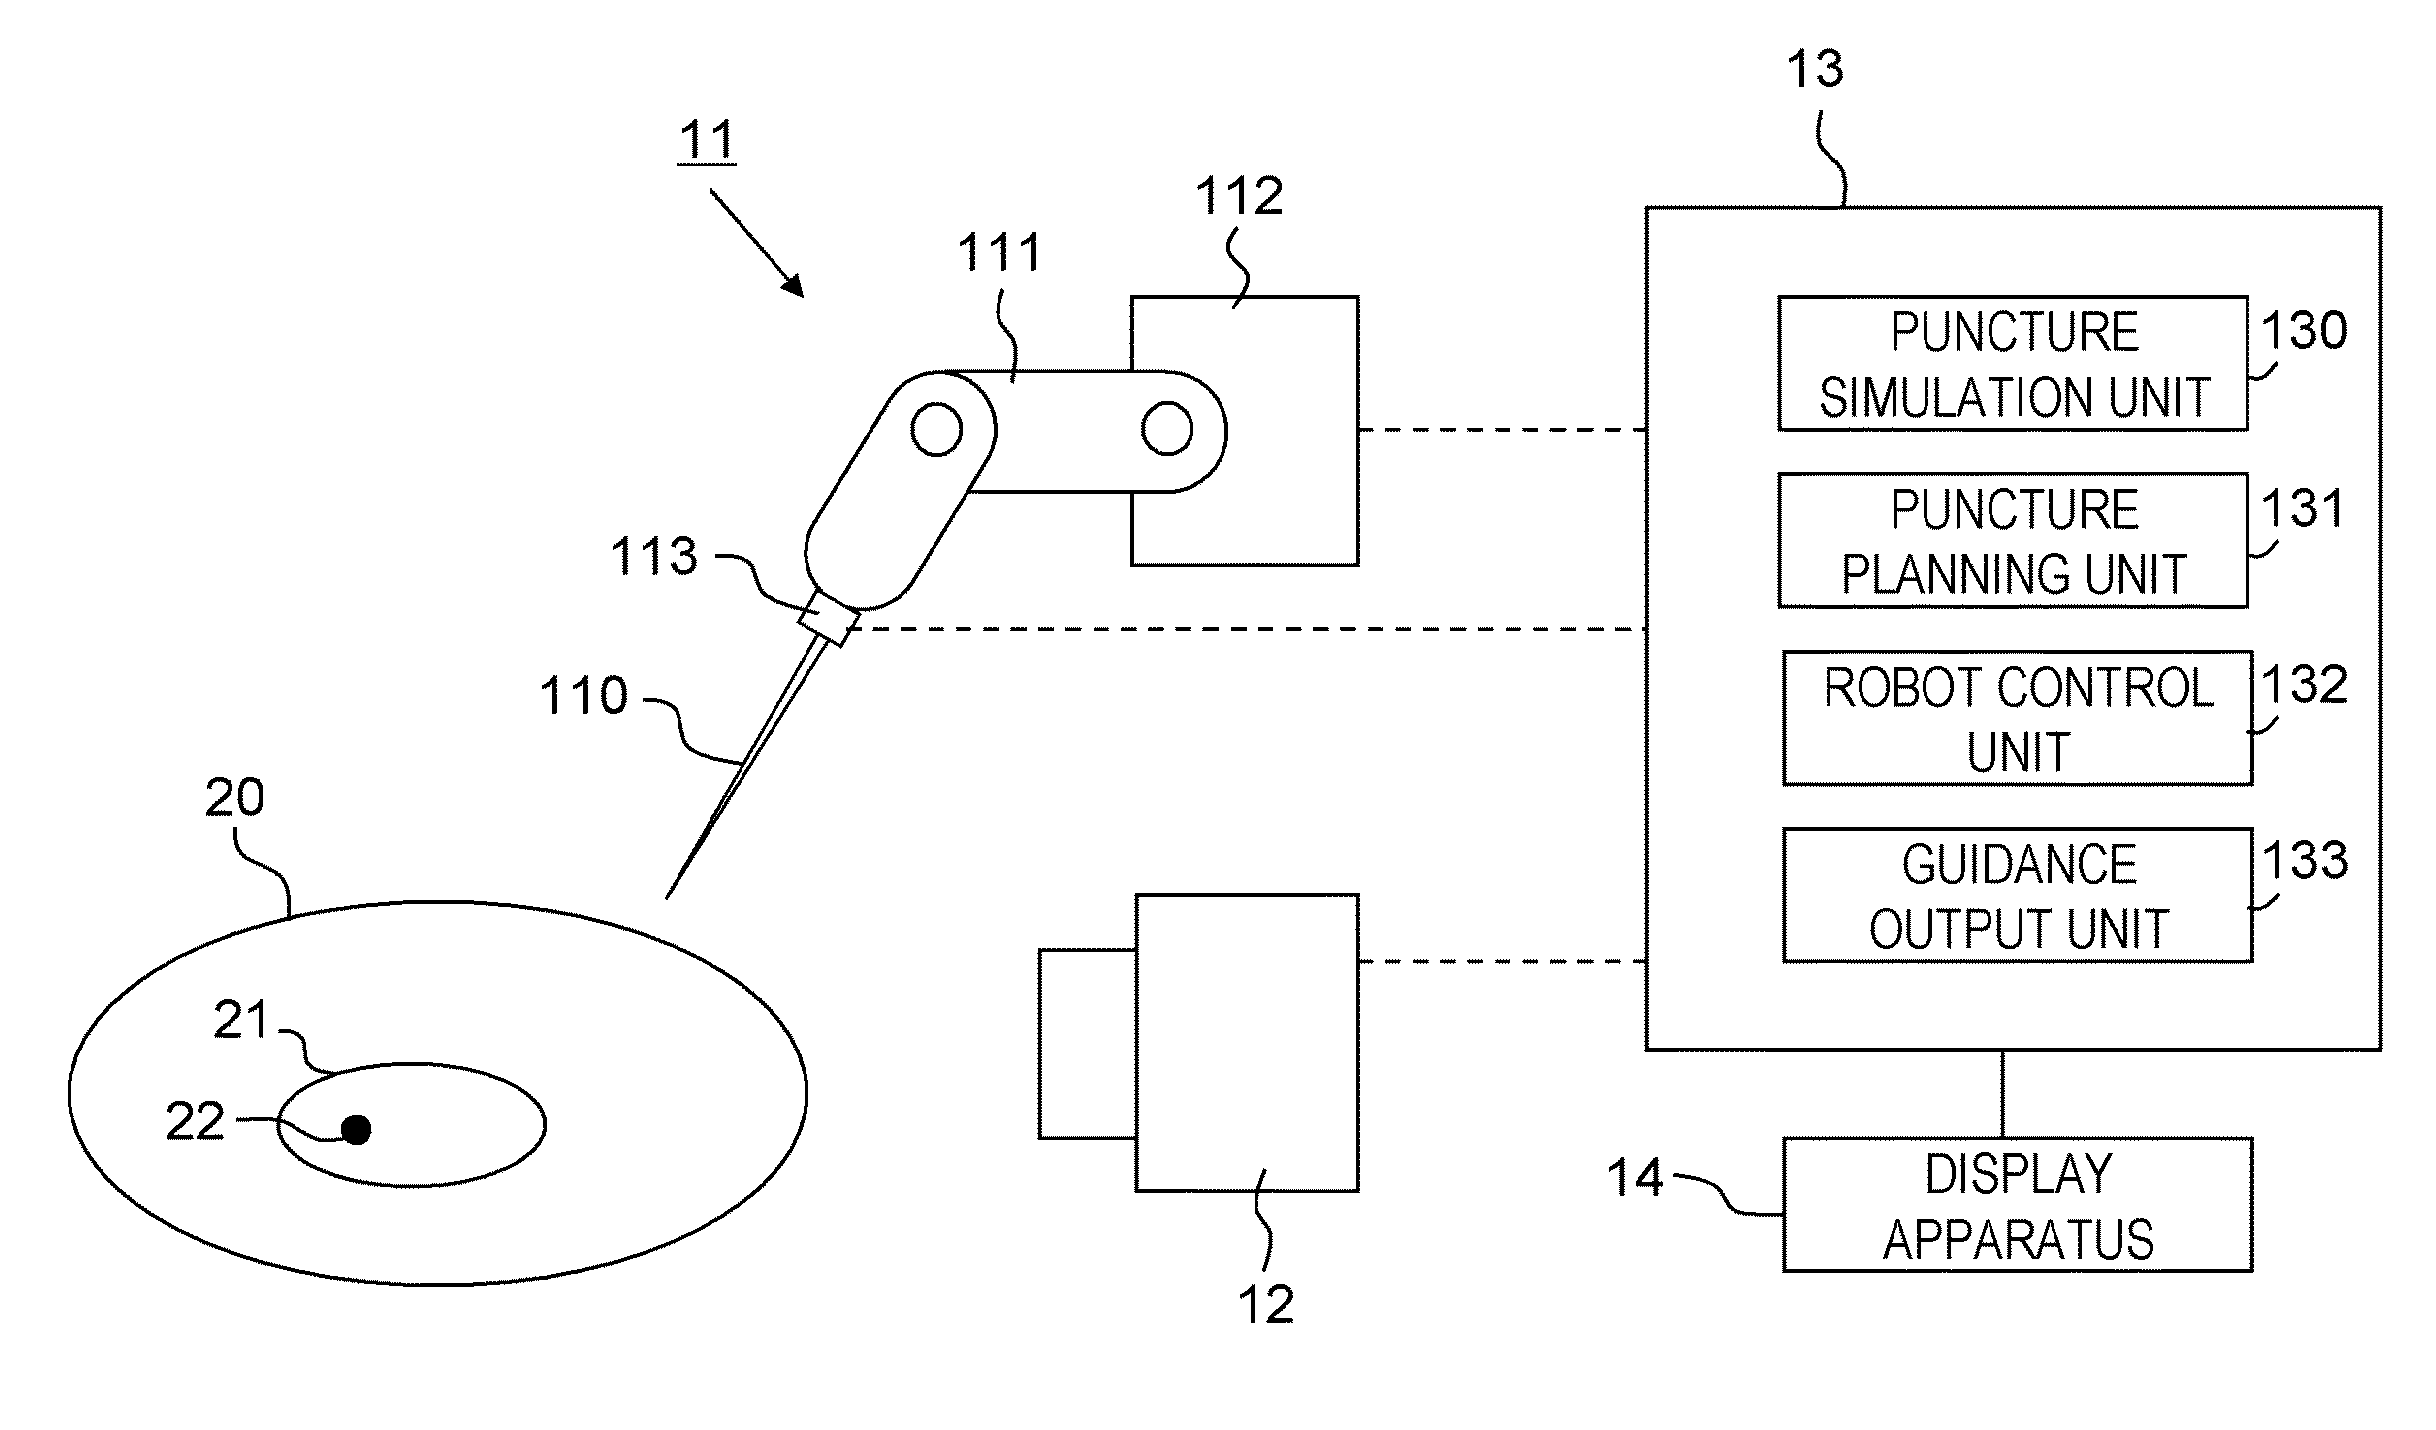 Puncture planning apparatus and puncture system